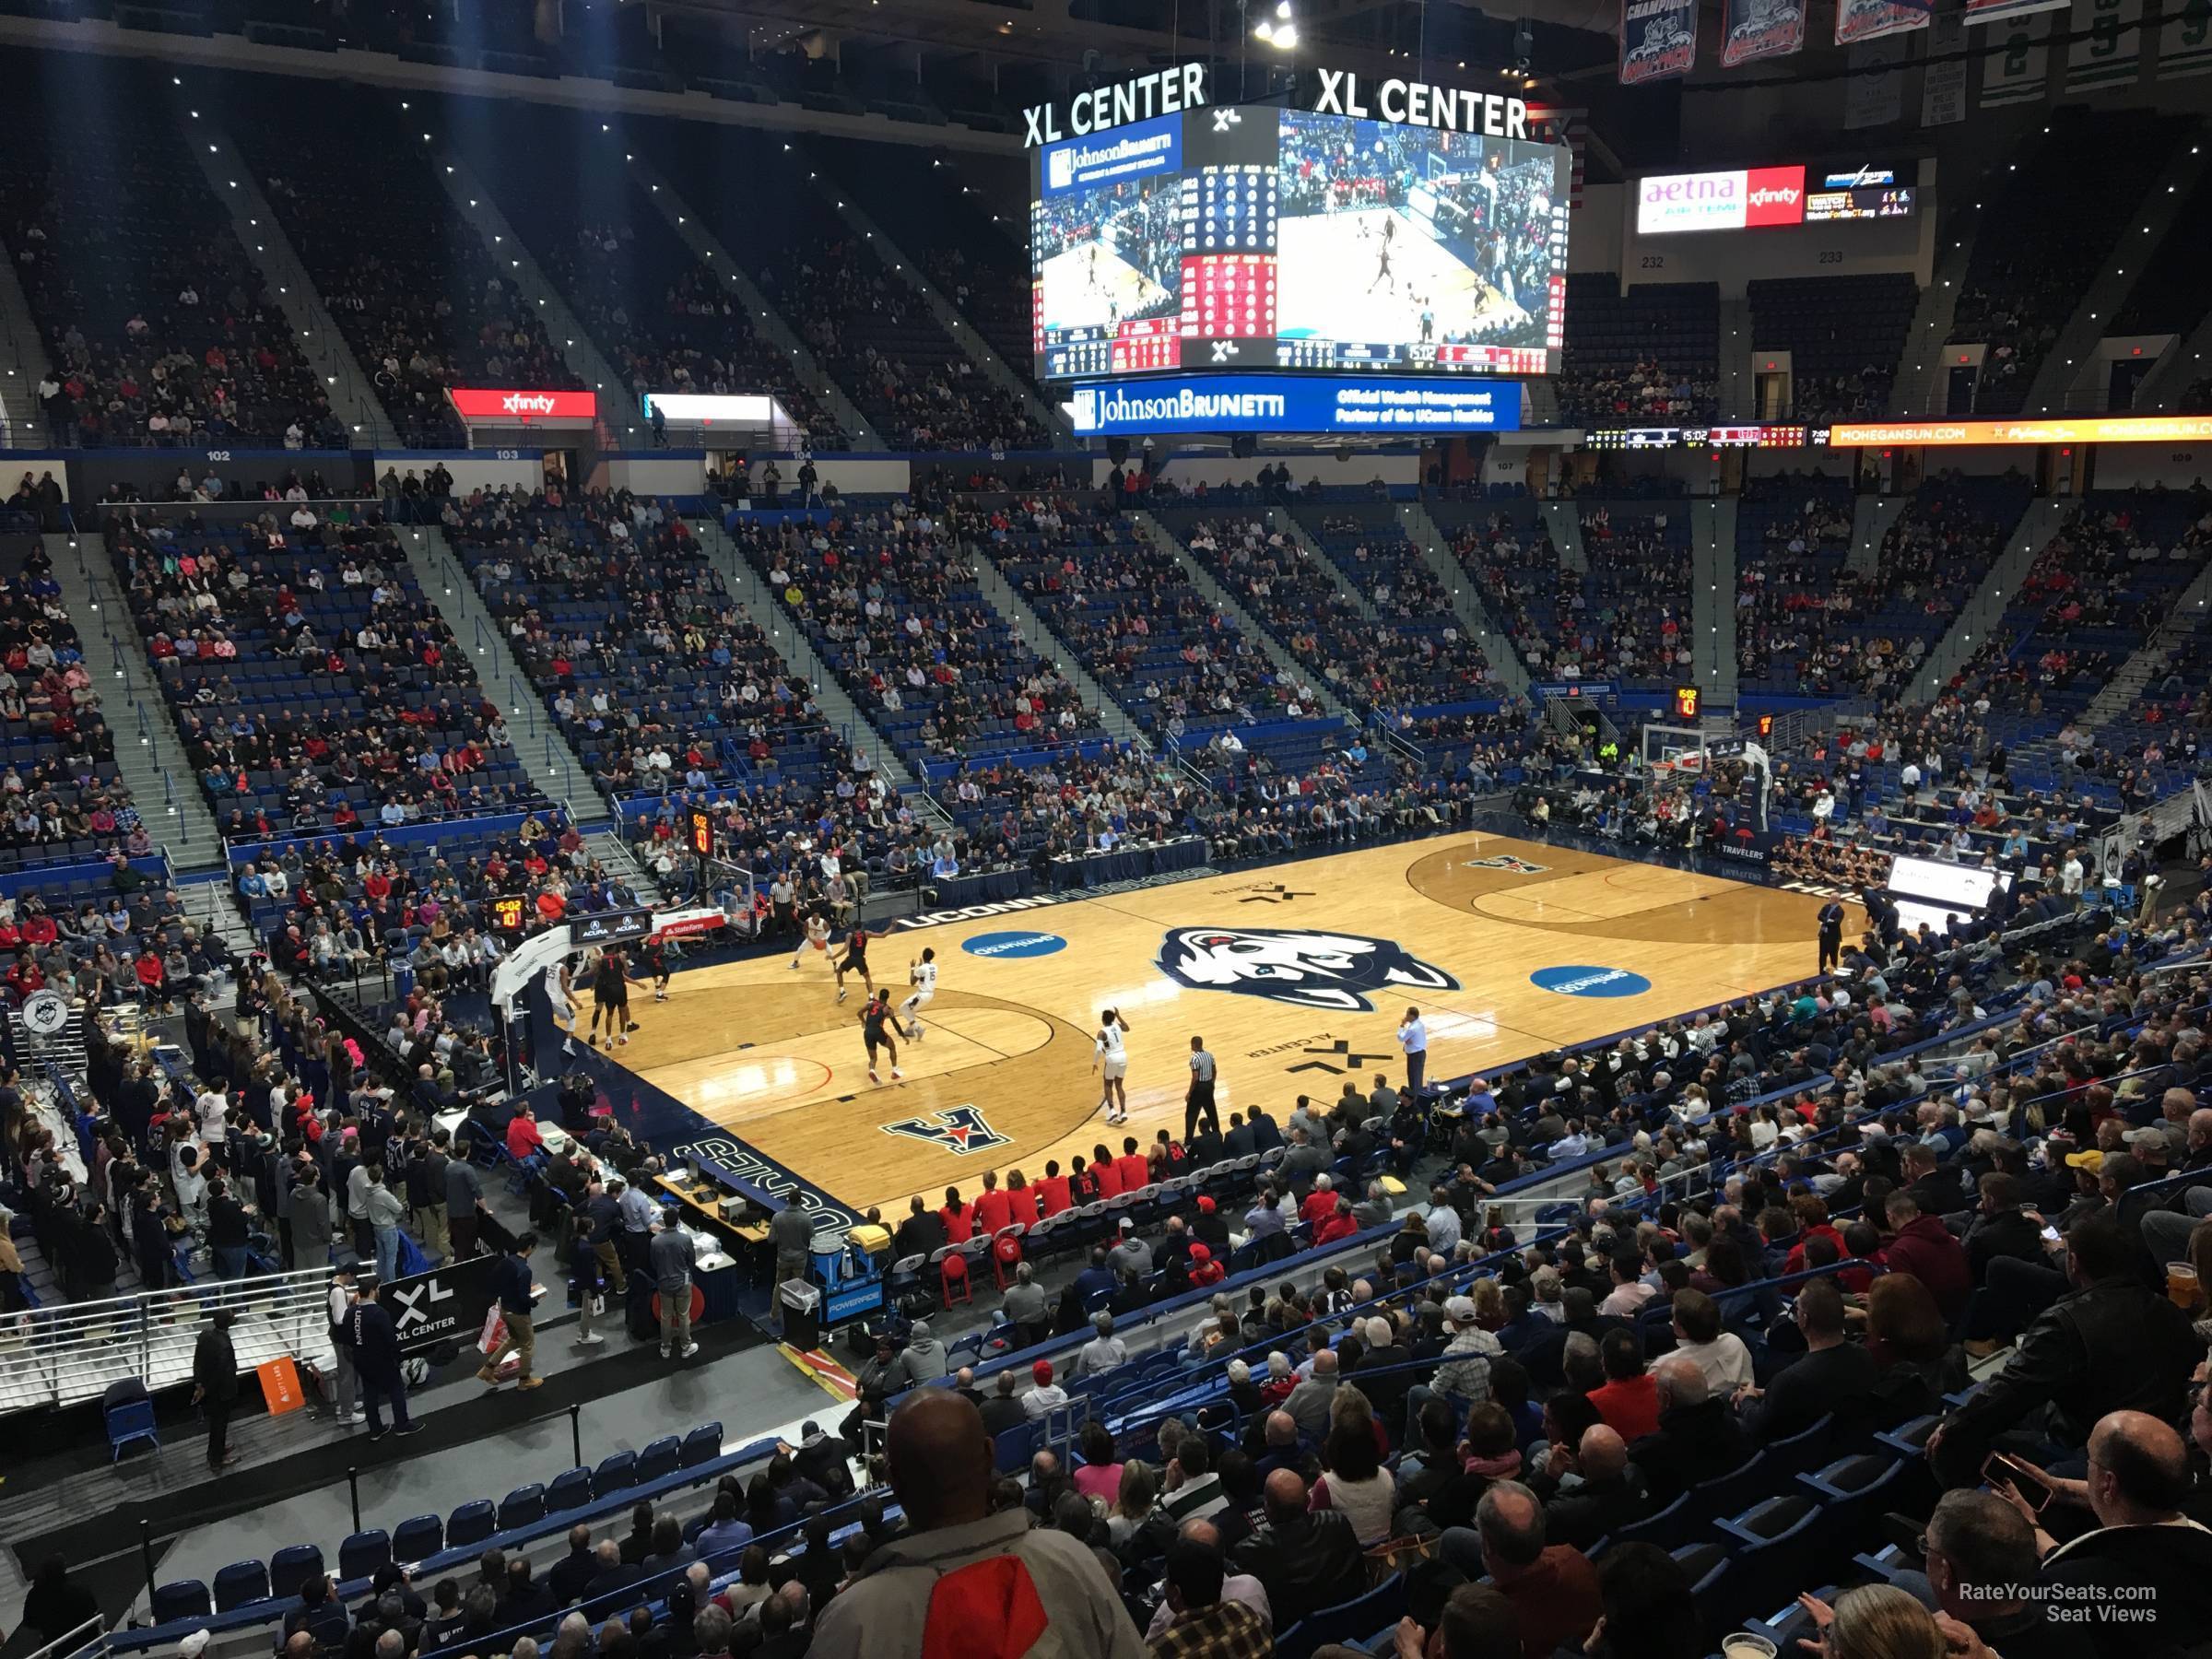 XL Center Section 118 - RateYourSeats.com